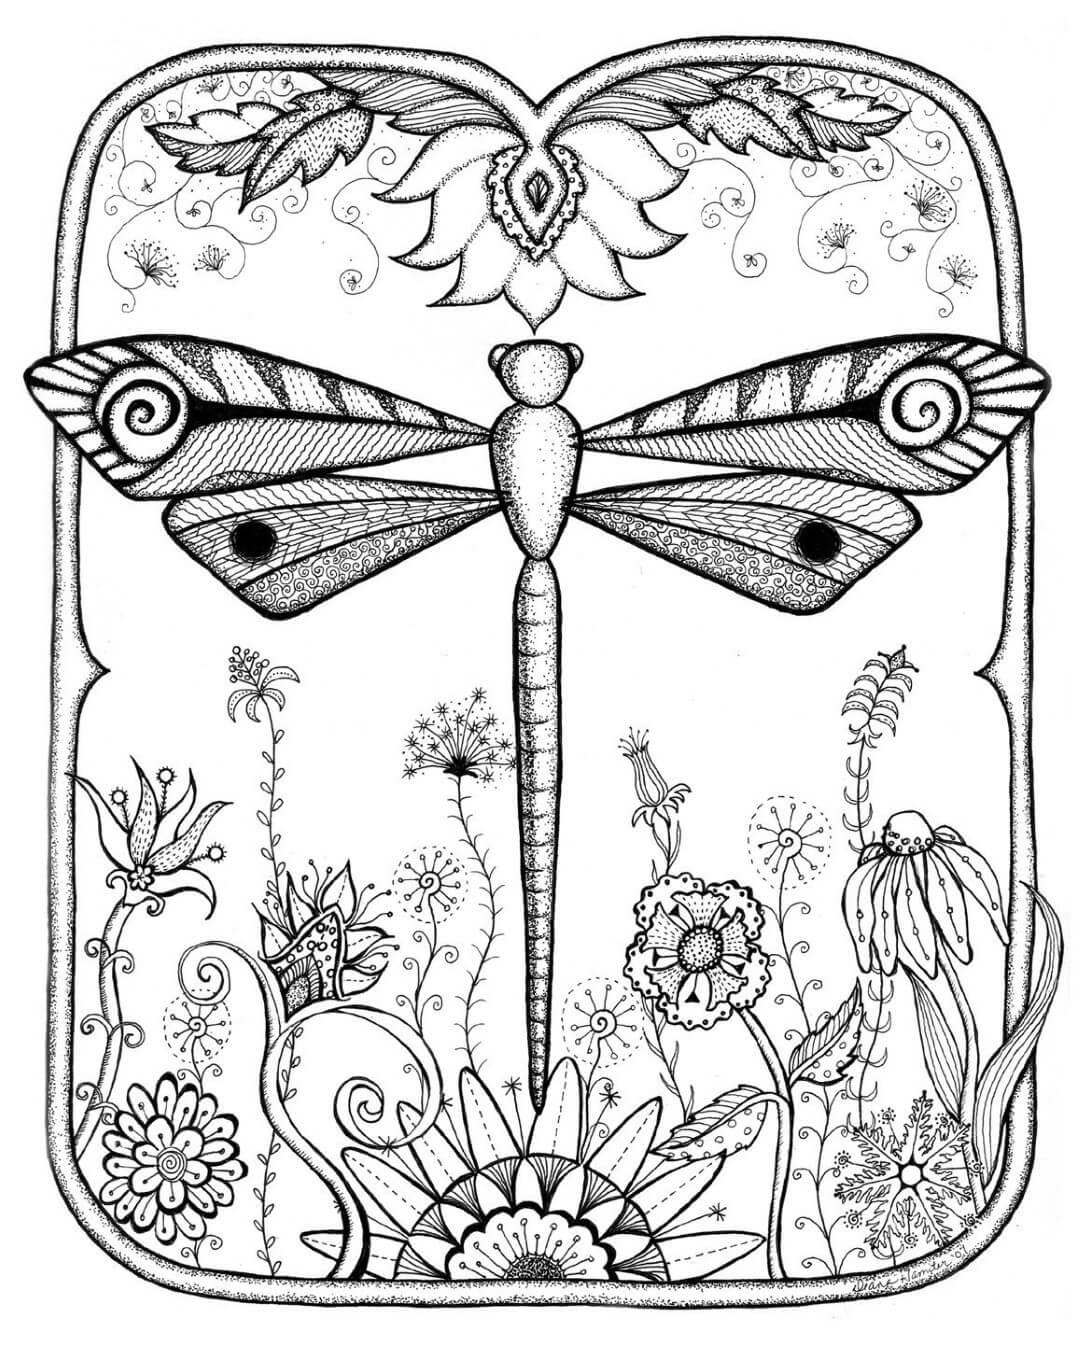 Coloring Pages : Coloringes Free Dragonflye For Adults Pictures Printable  Preschoolers Thank You Nurses 58 Tremendous Dragonfly Coloring Page ~  Off-The Wall ATL